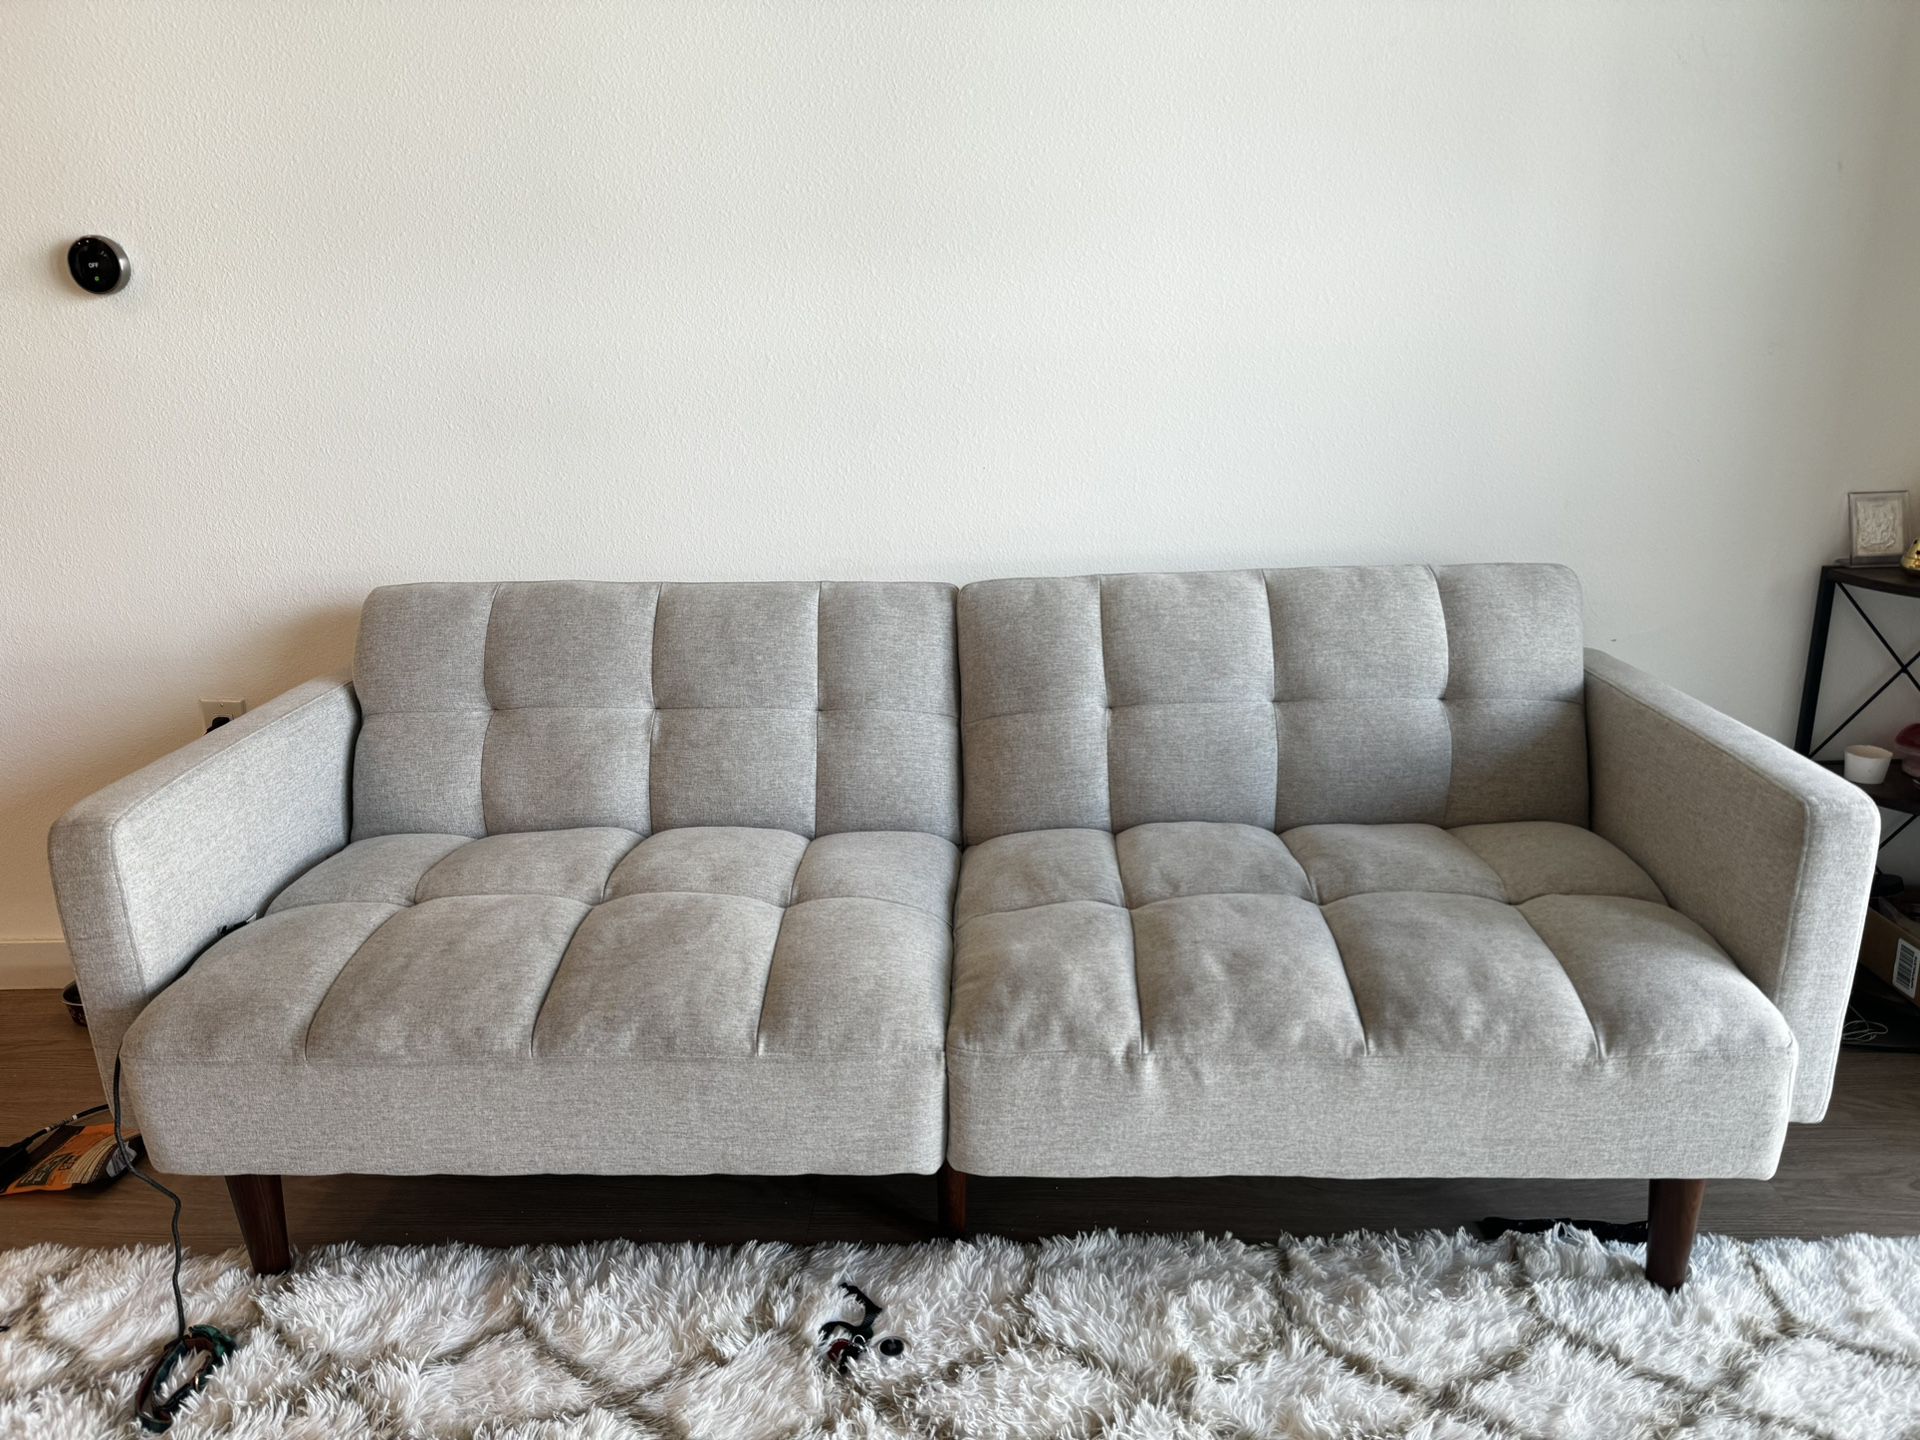 Modern Futon Couch, Sofa Bed/ Sleeper Sofa - MOVE OUT SALE!!!